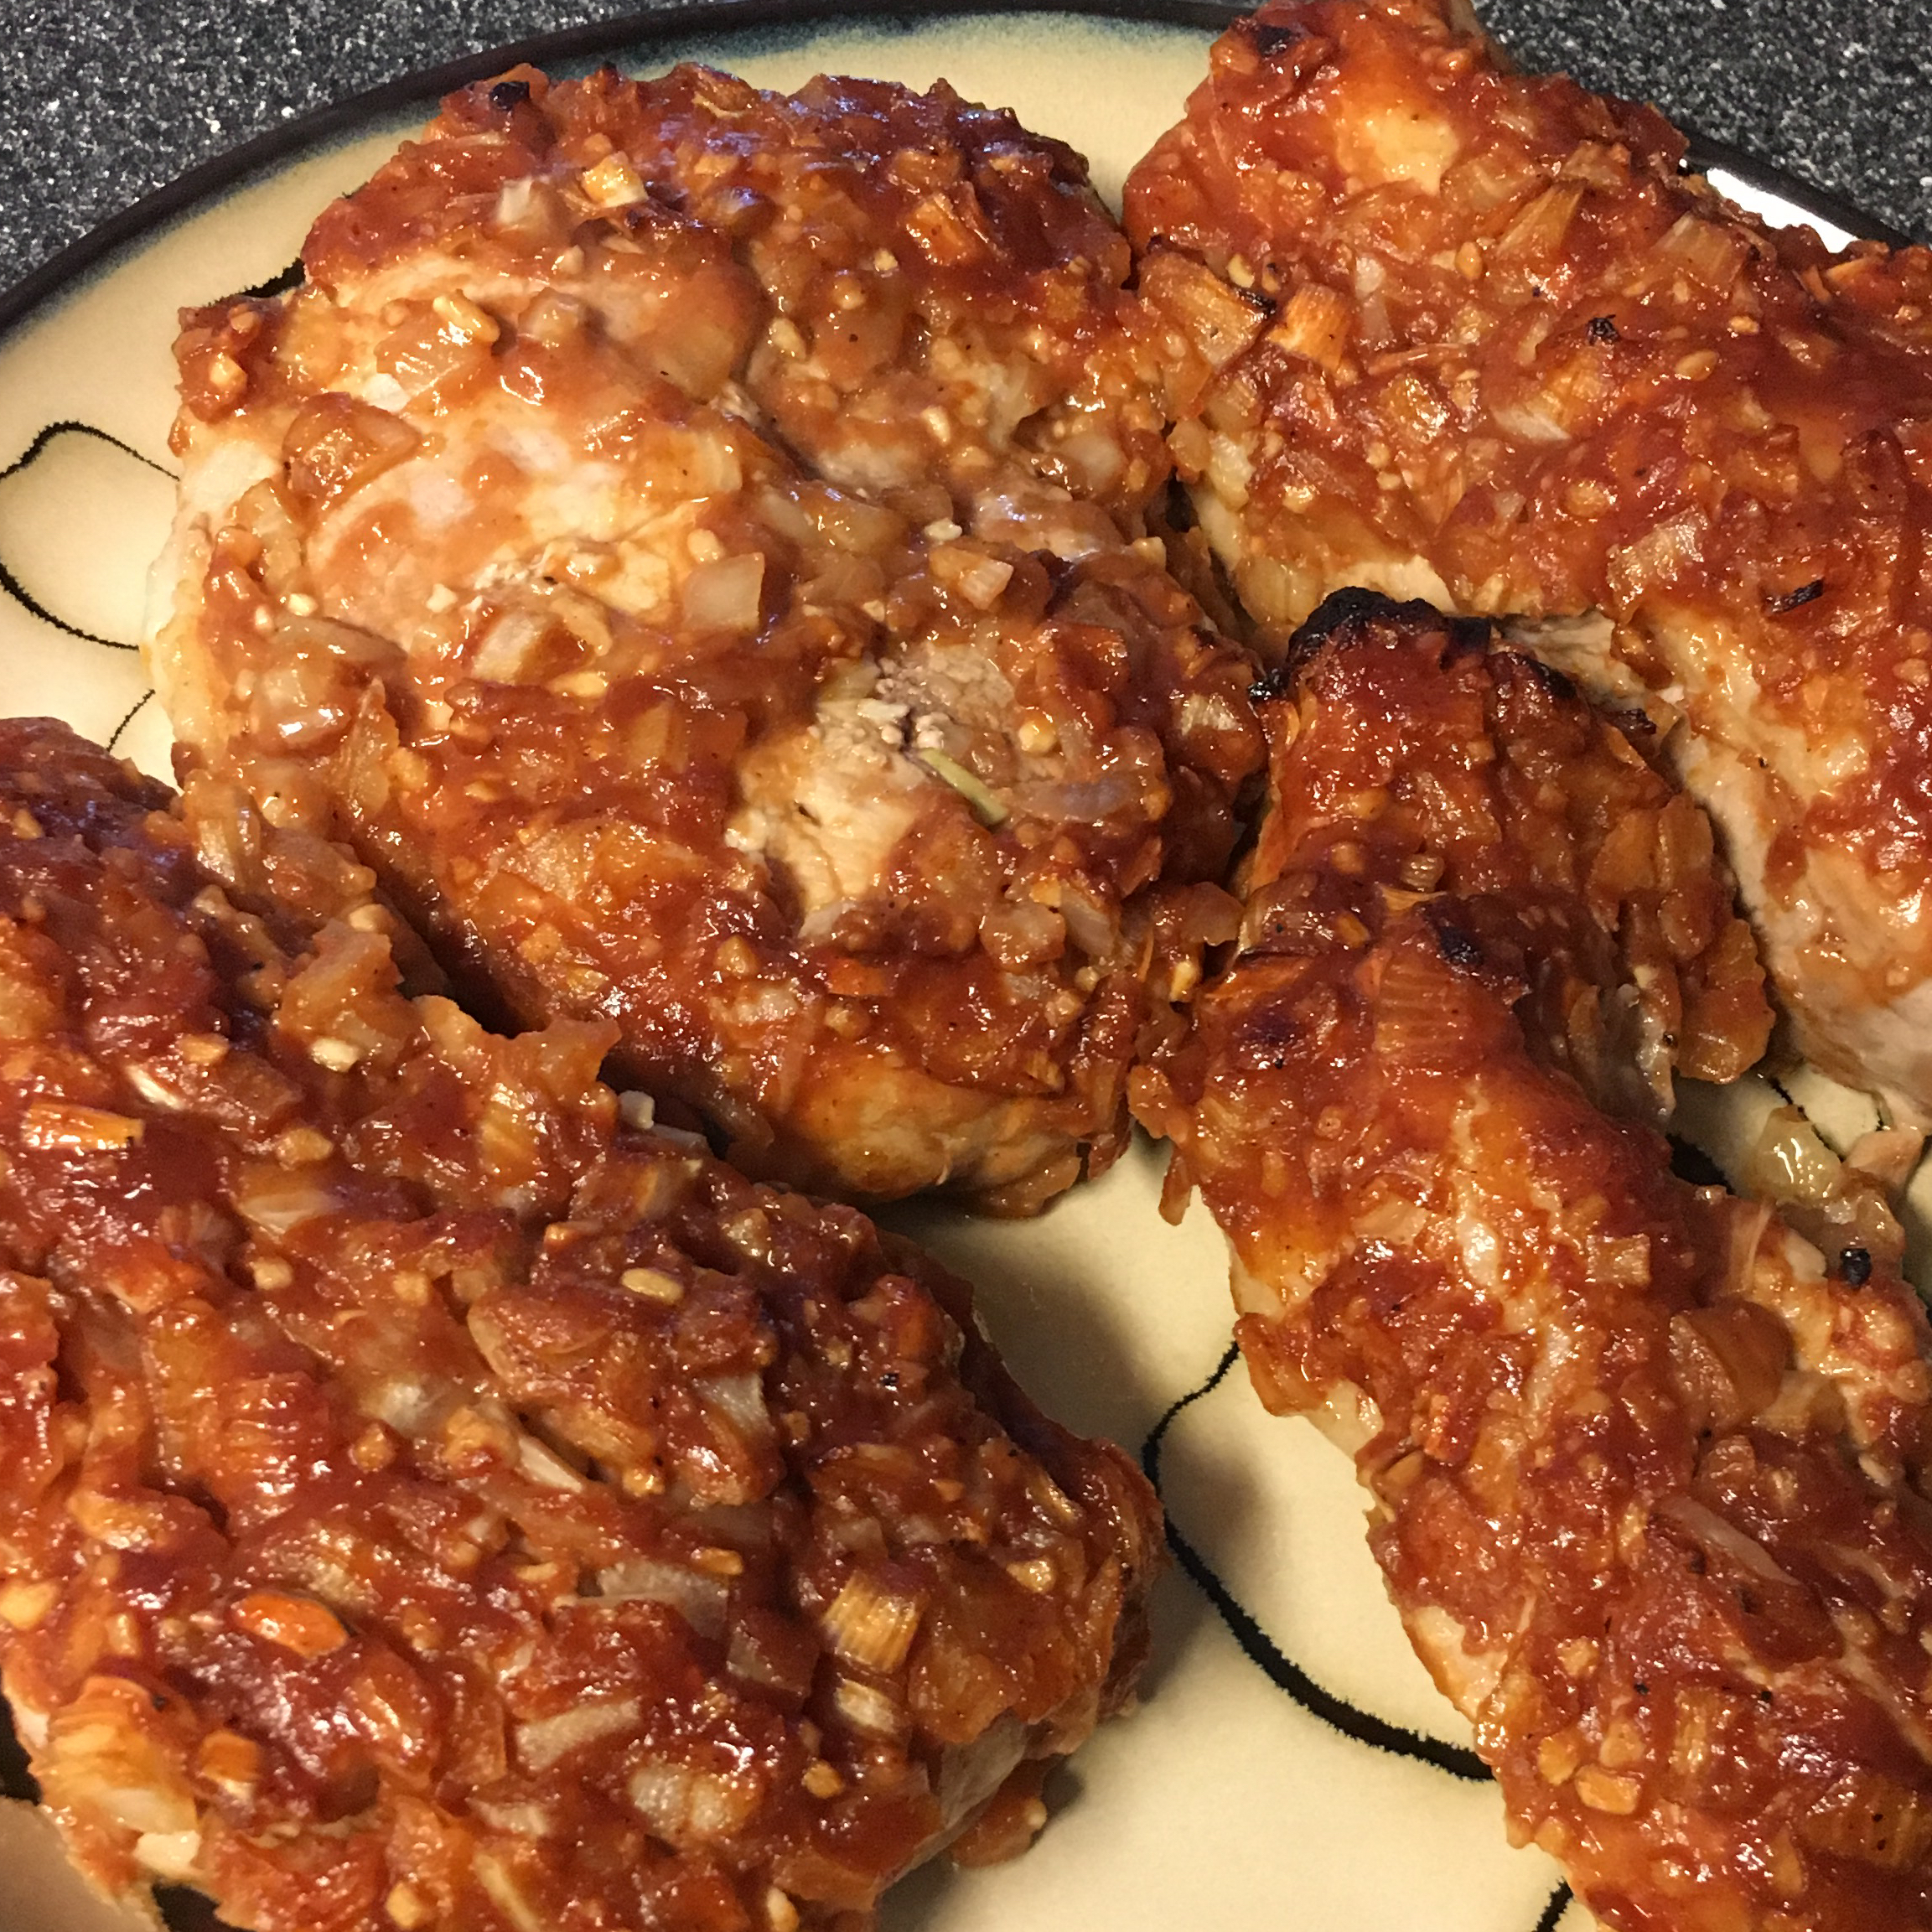 Easy Baked Bbq Pork Chops Recipe Allrecipes,What Do Horses Eat Out Of